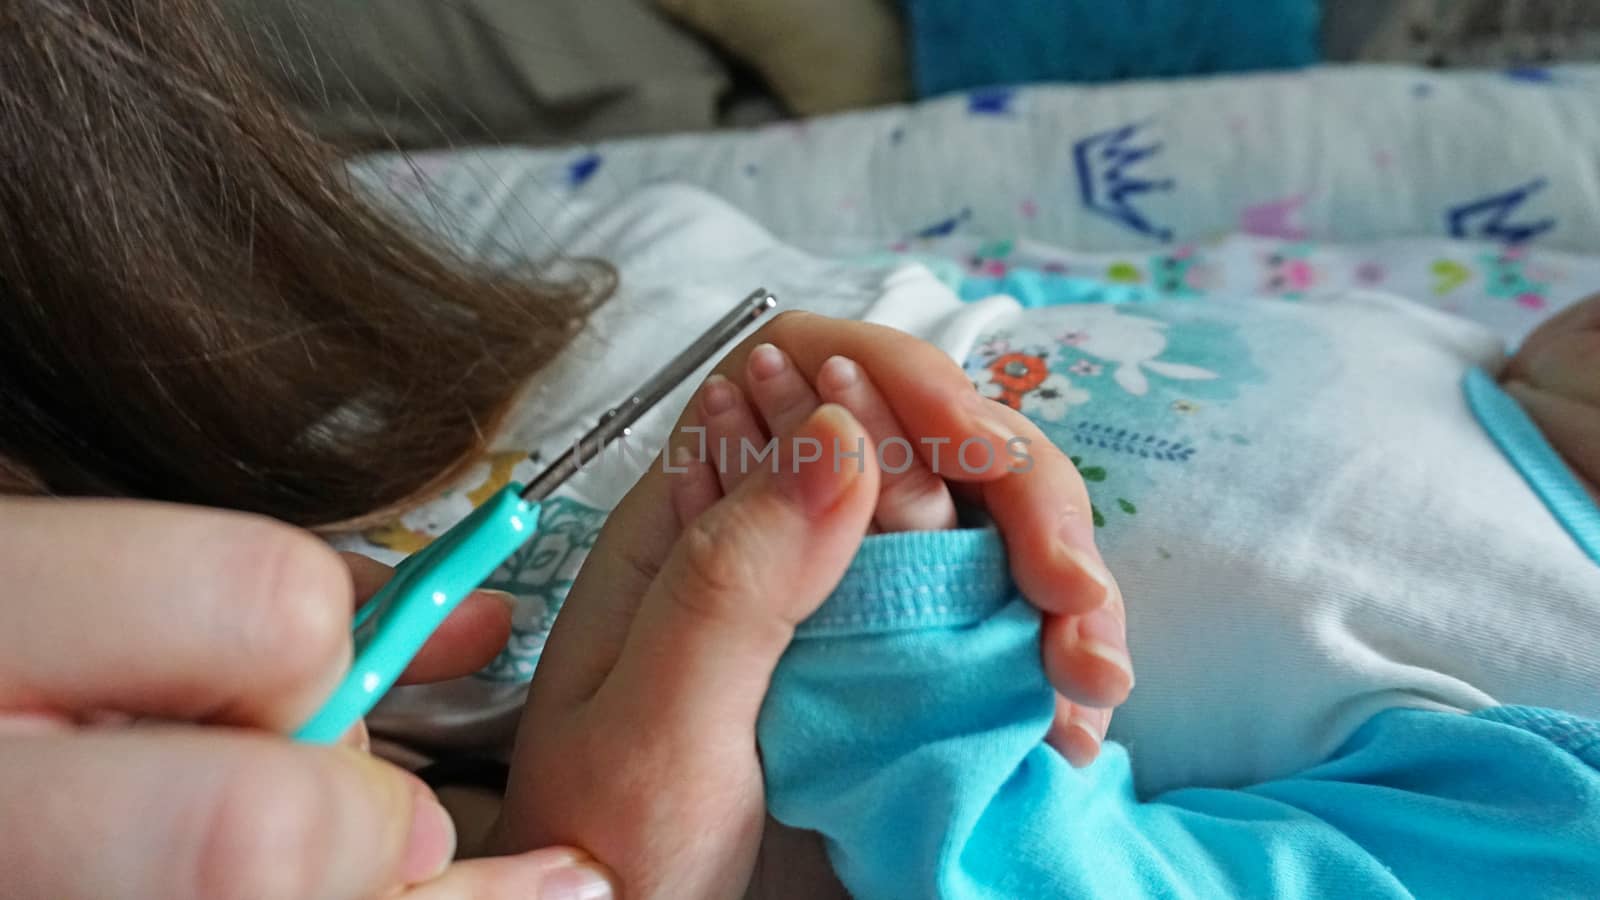 A newborn child's nails are cut with scissors. by Passcal